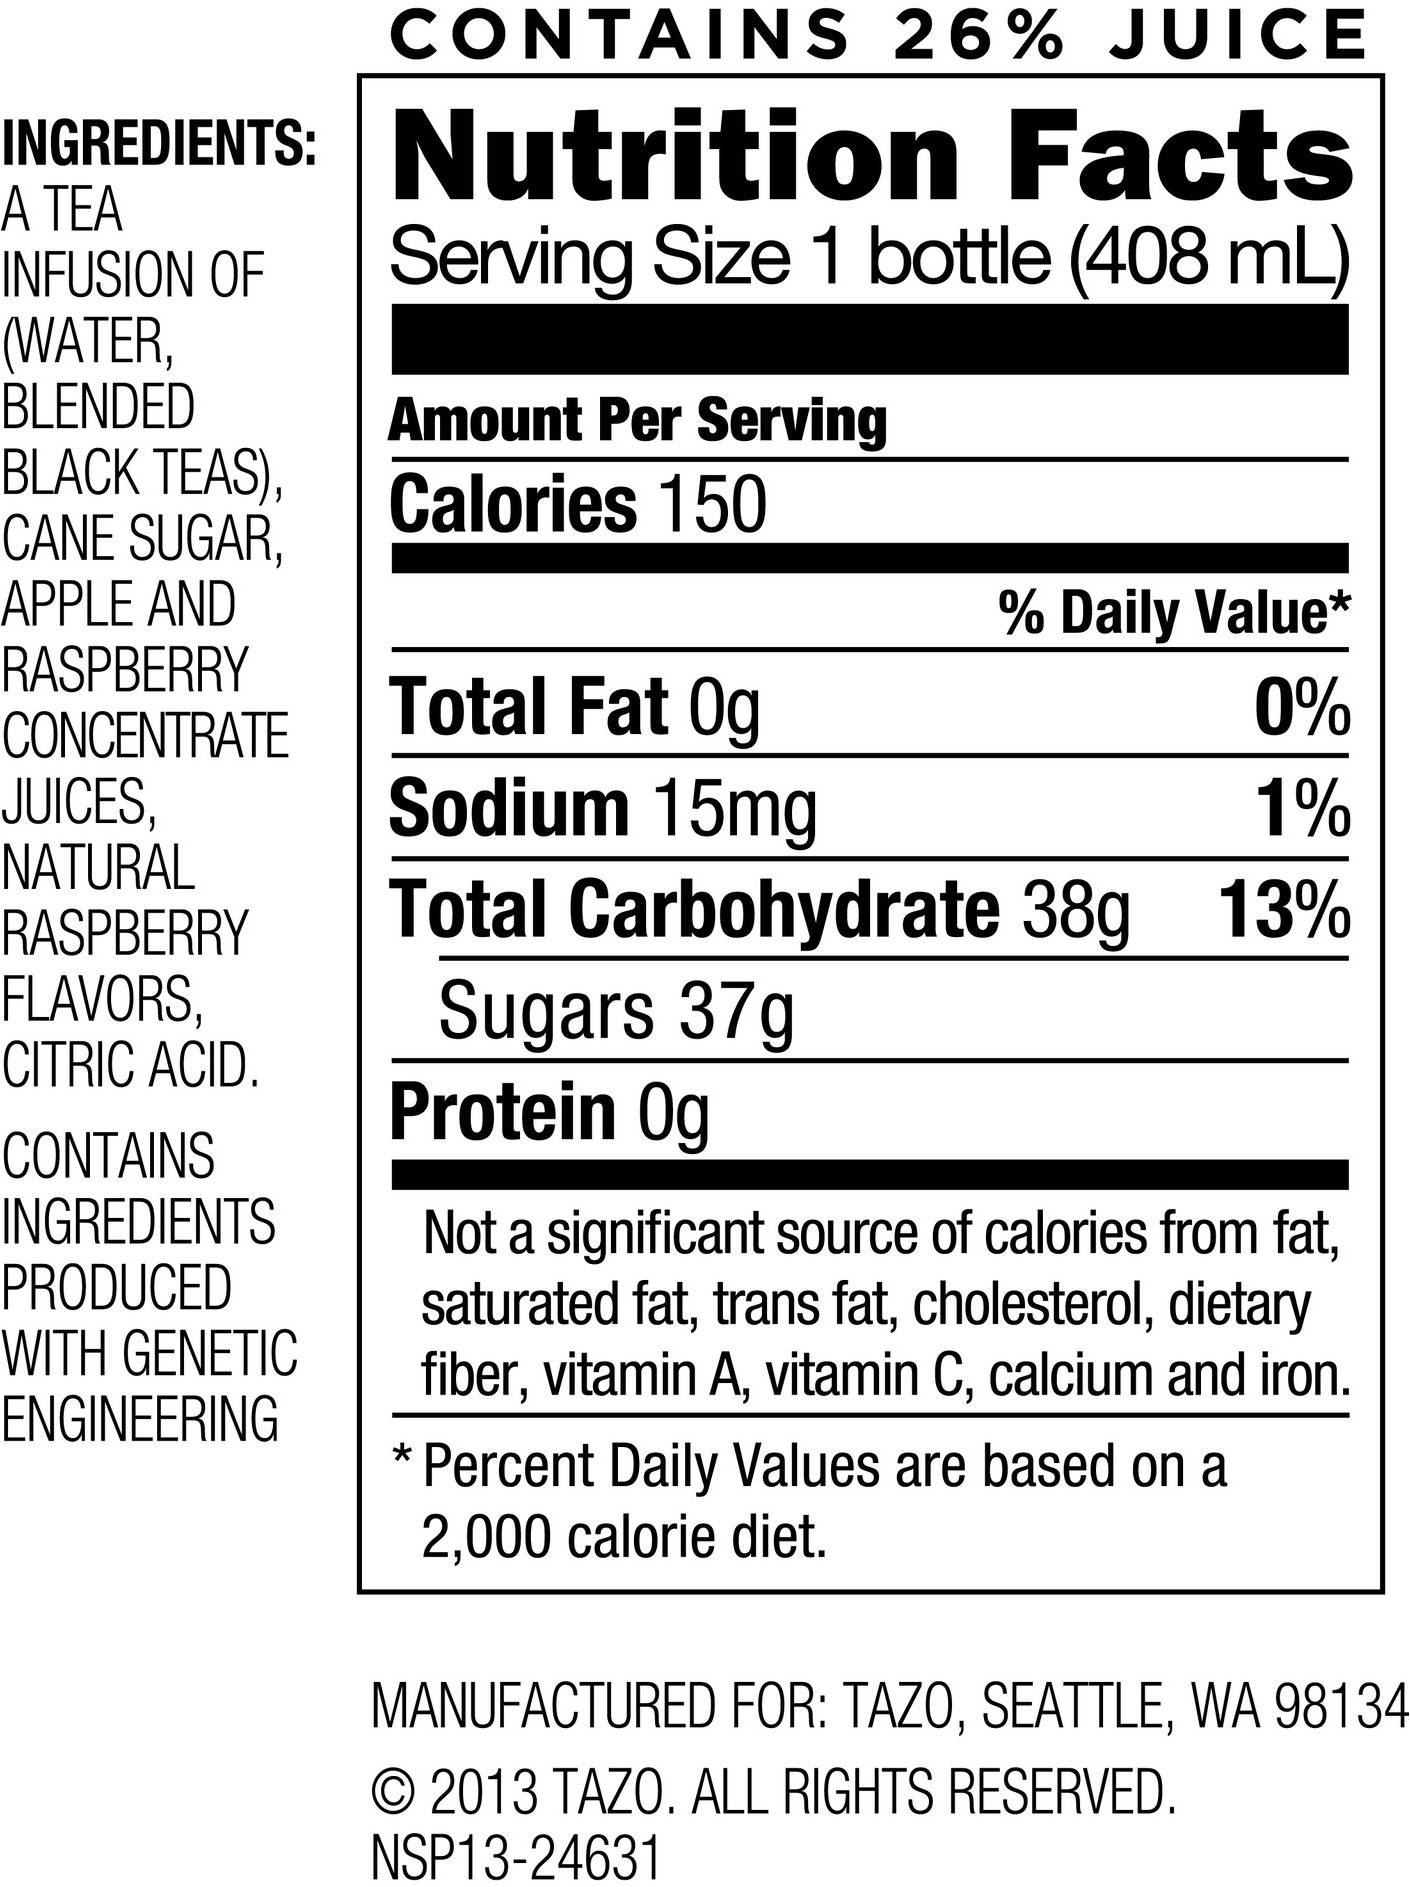 Image describing nutrition information for product Tazo Tazoberry (E-comm)